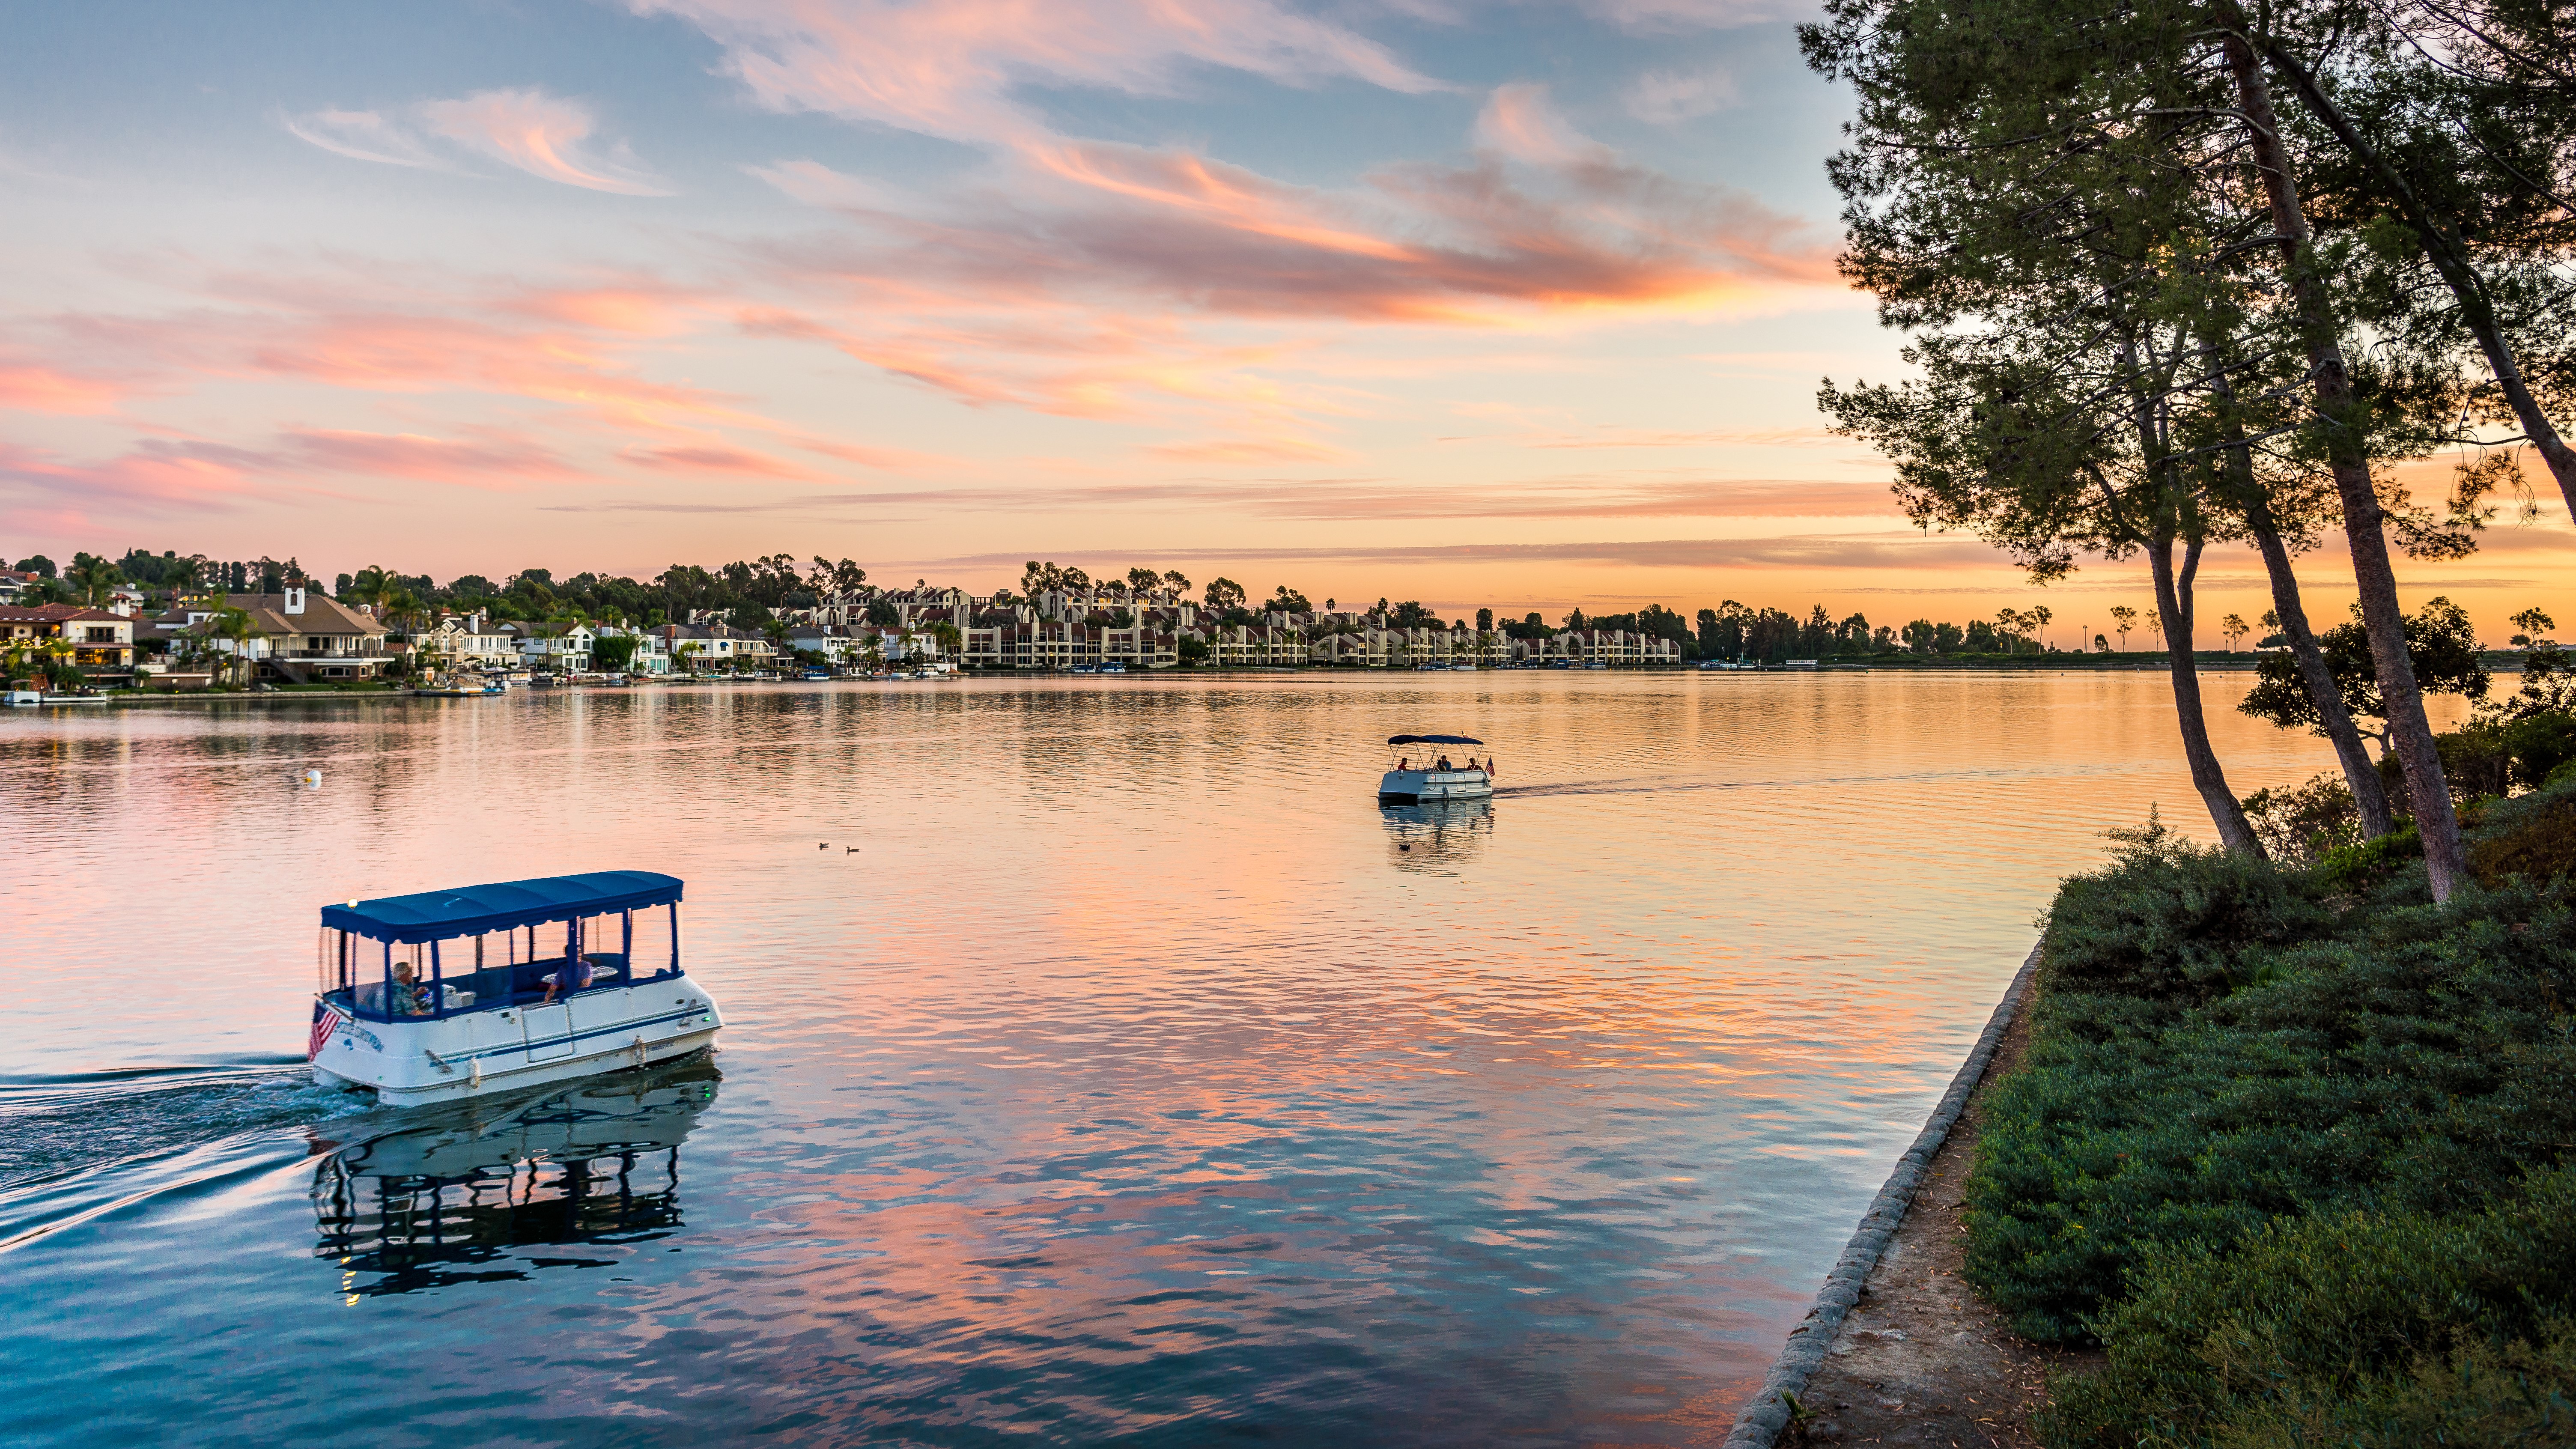 Two boats on Lake Mission Viejo at Sunset